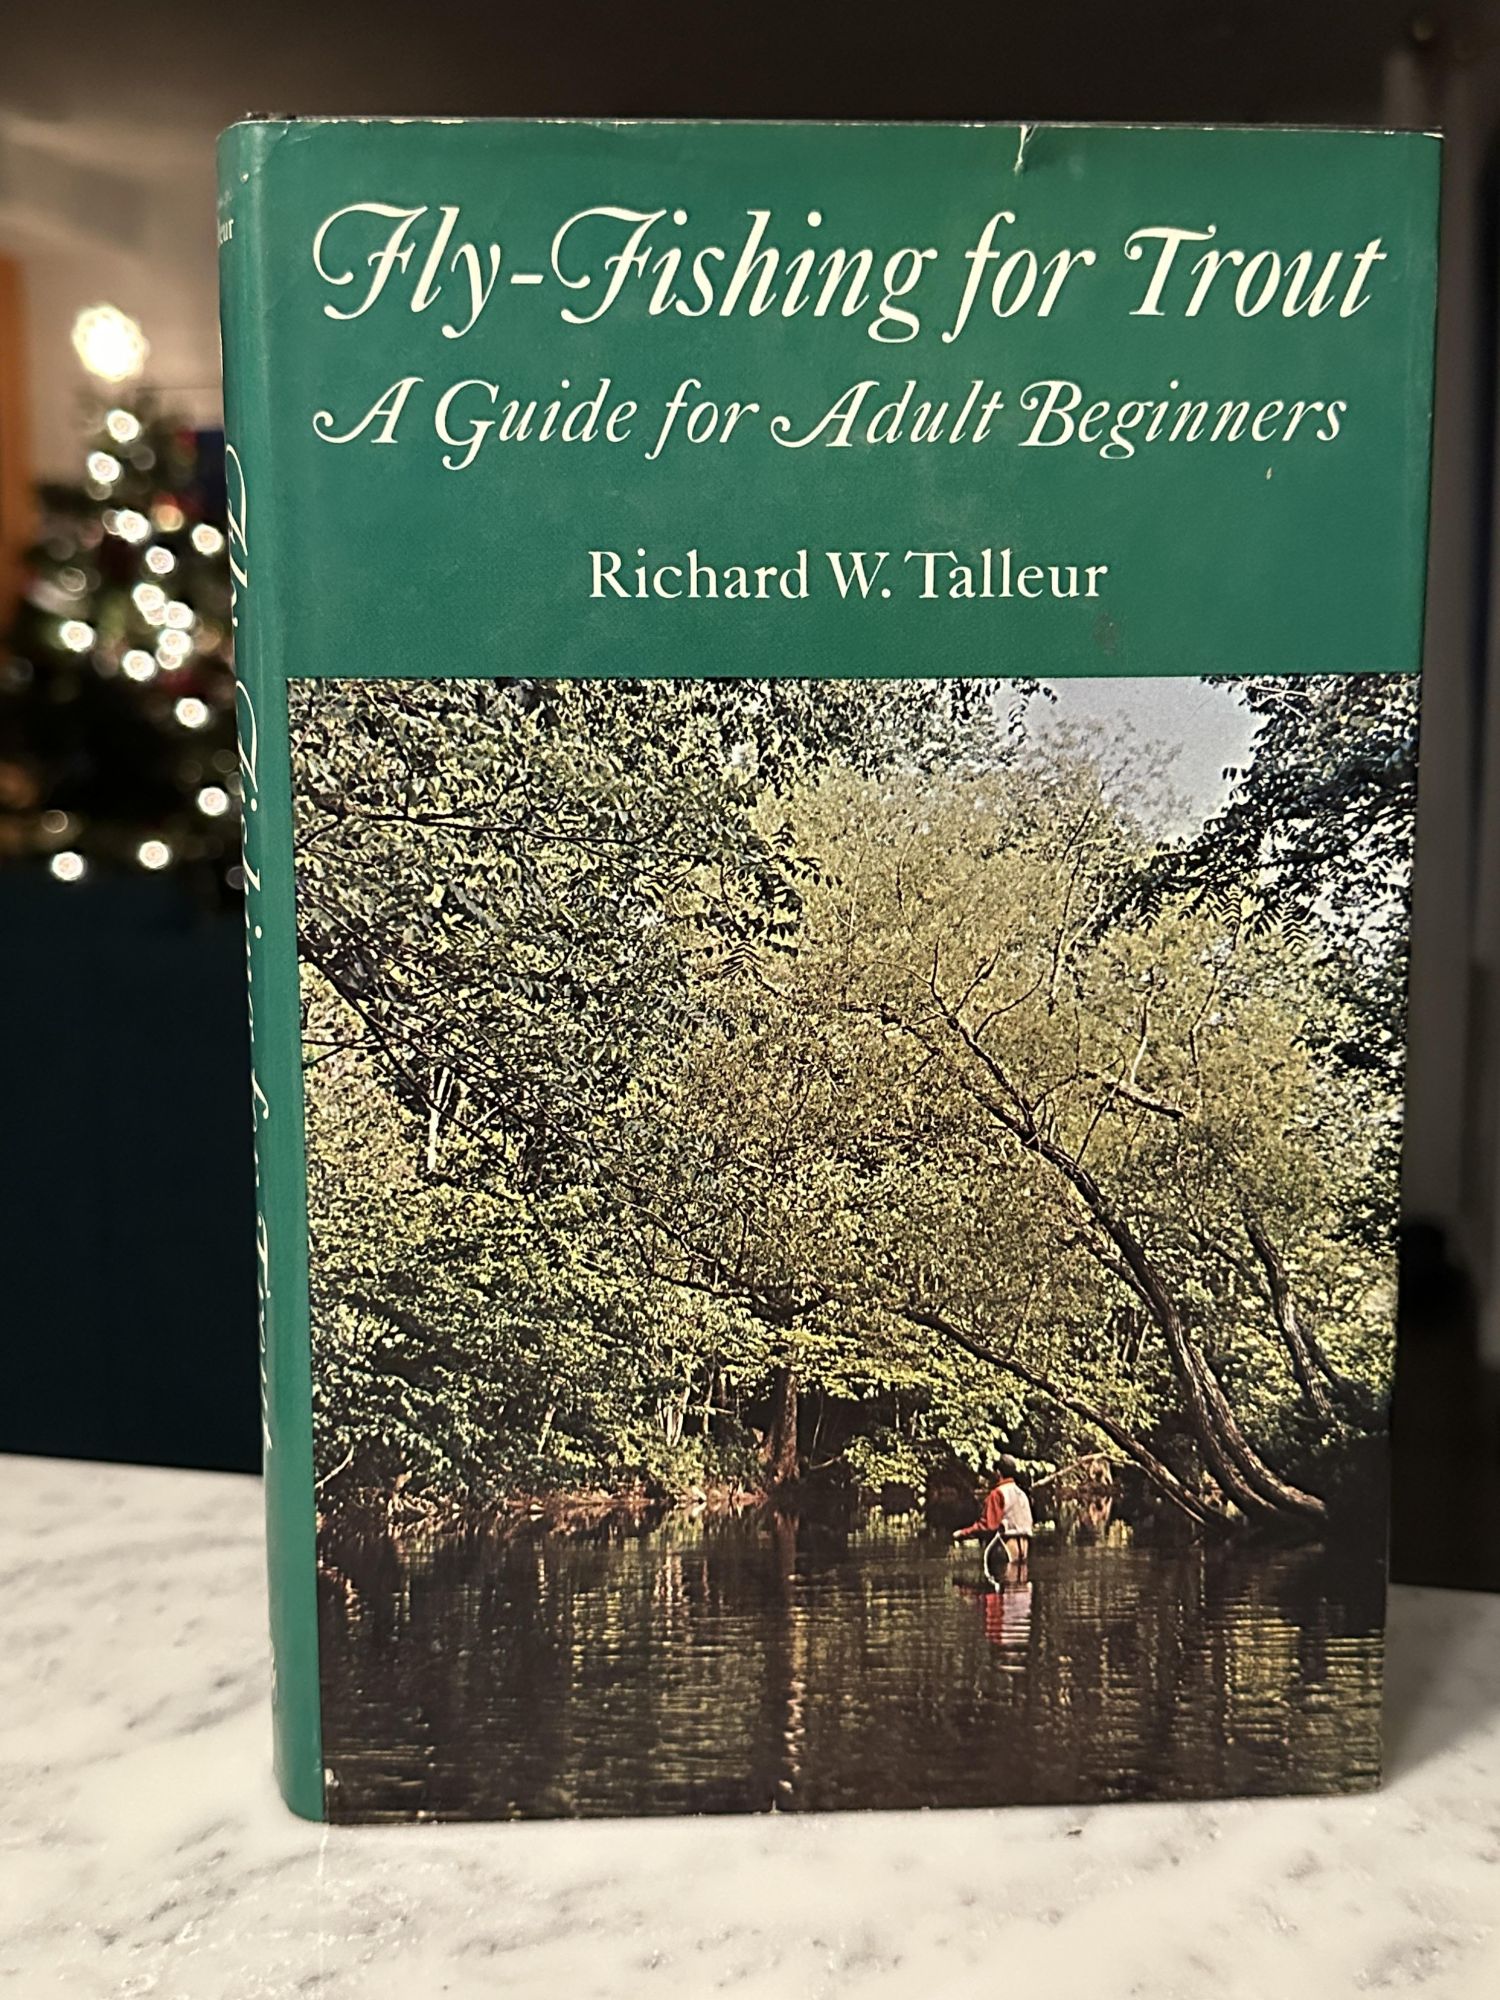 Fly-Fishing for Trout. Richard W. Talleur.